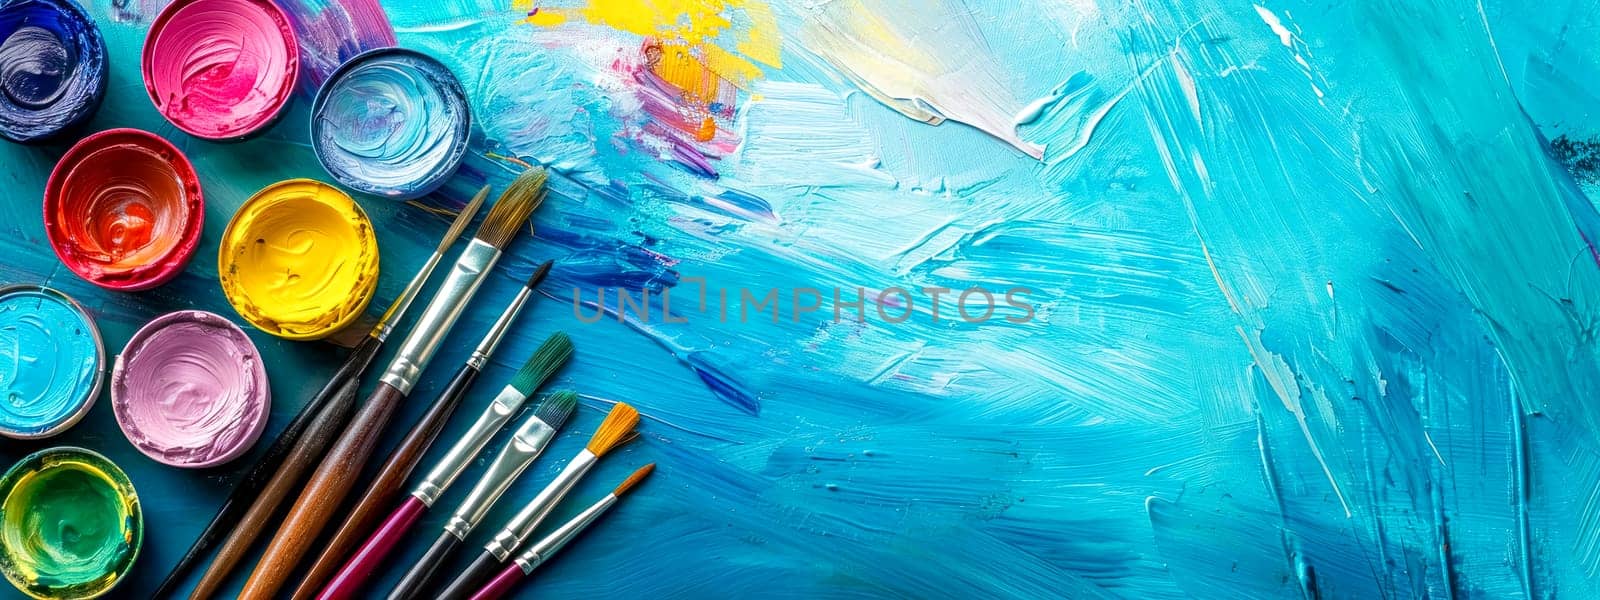 A colorful array of open paint pots and various-sized brushes on a vivid turquoise painted canvas background, showcasing creativity and the art-making process. by Edophoto